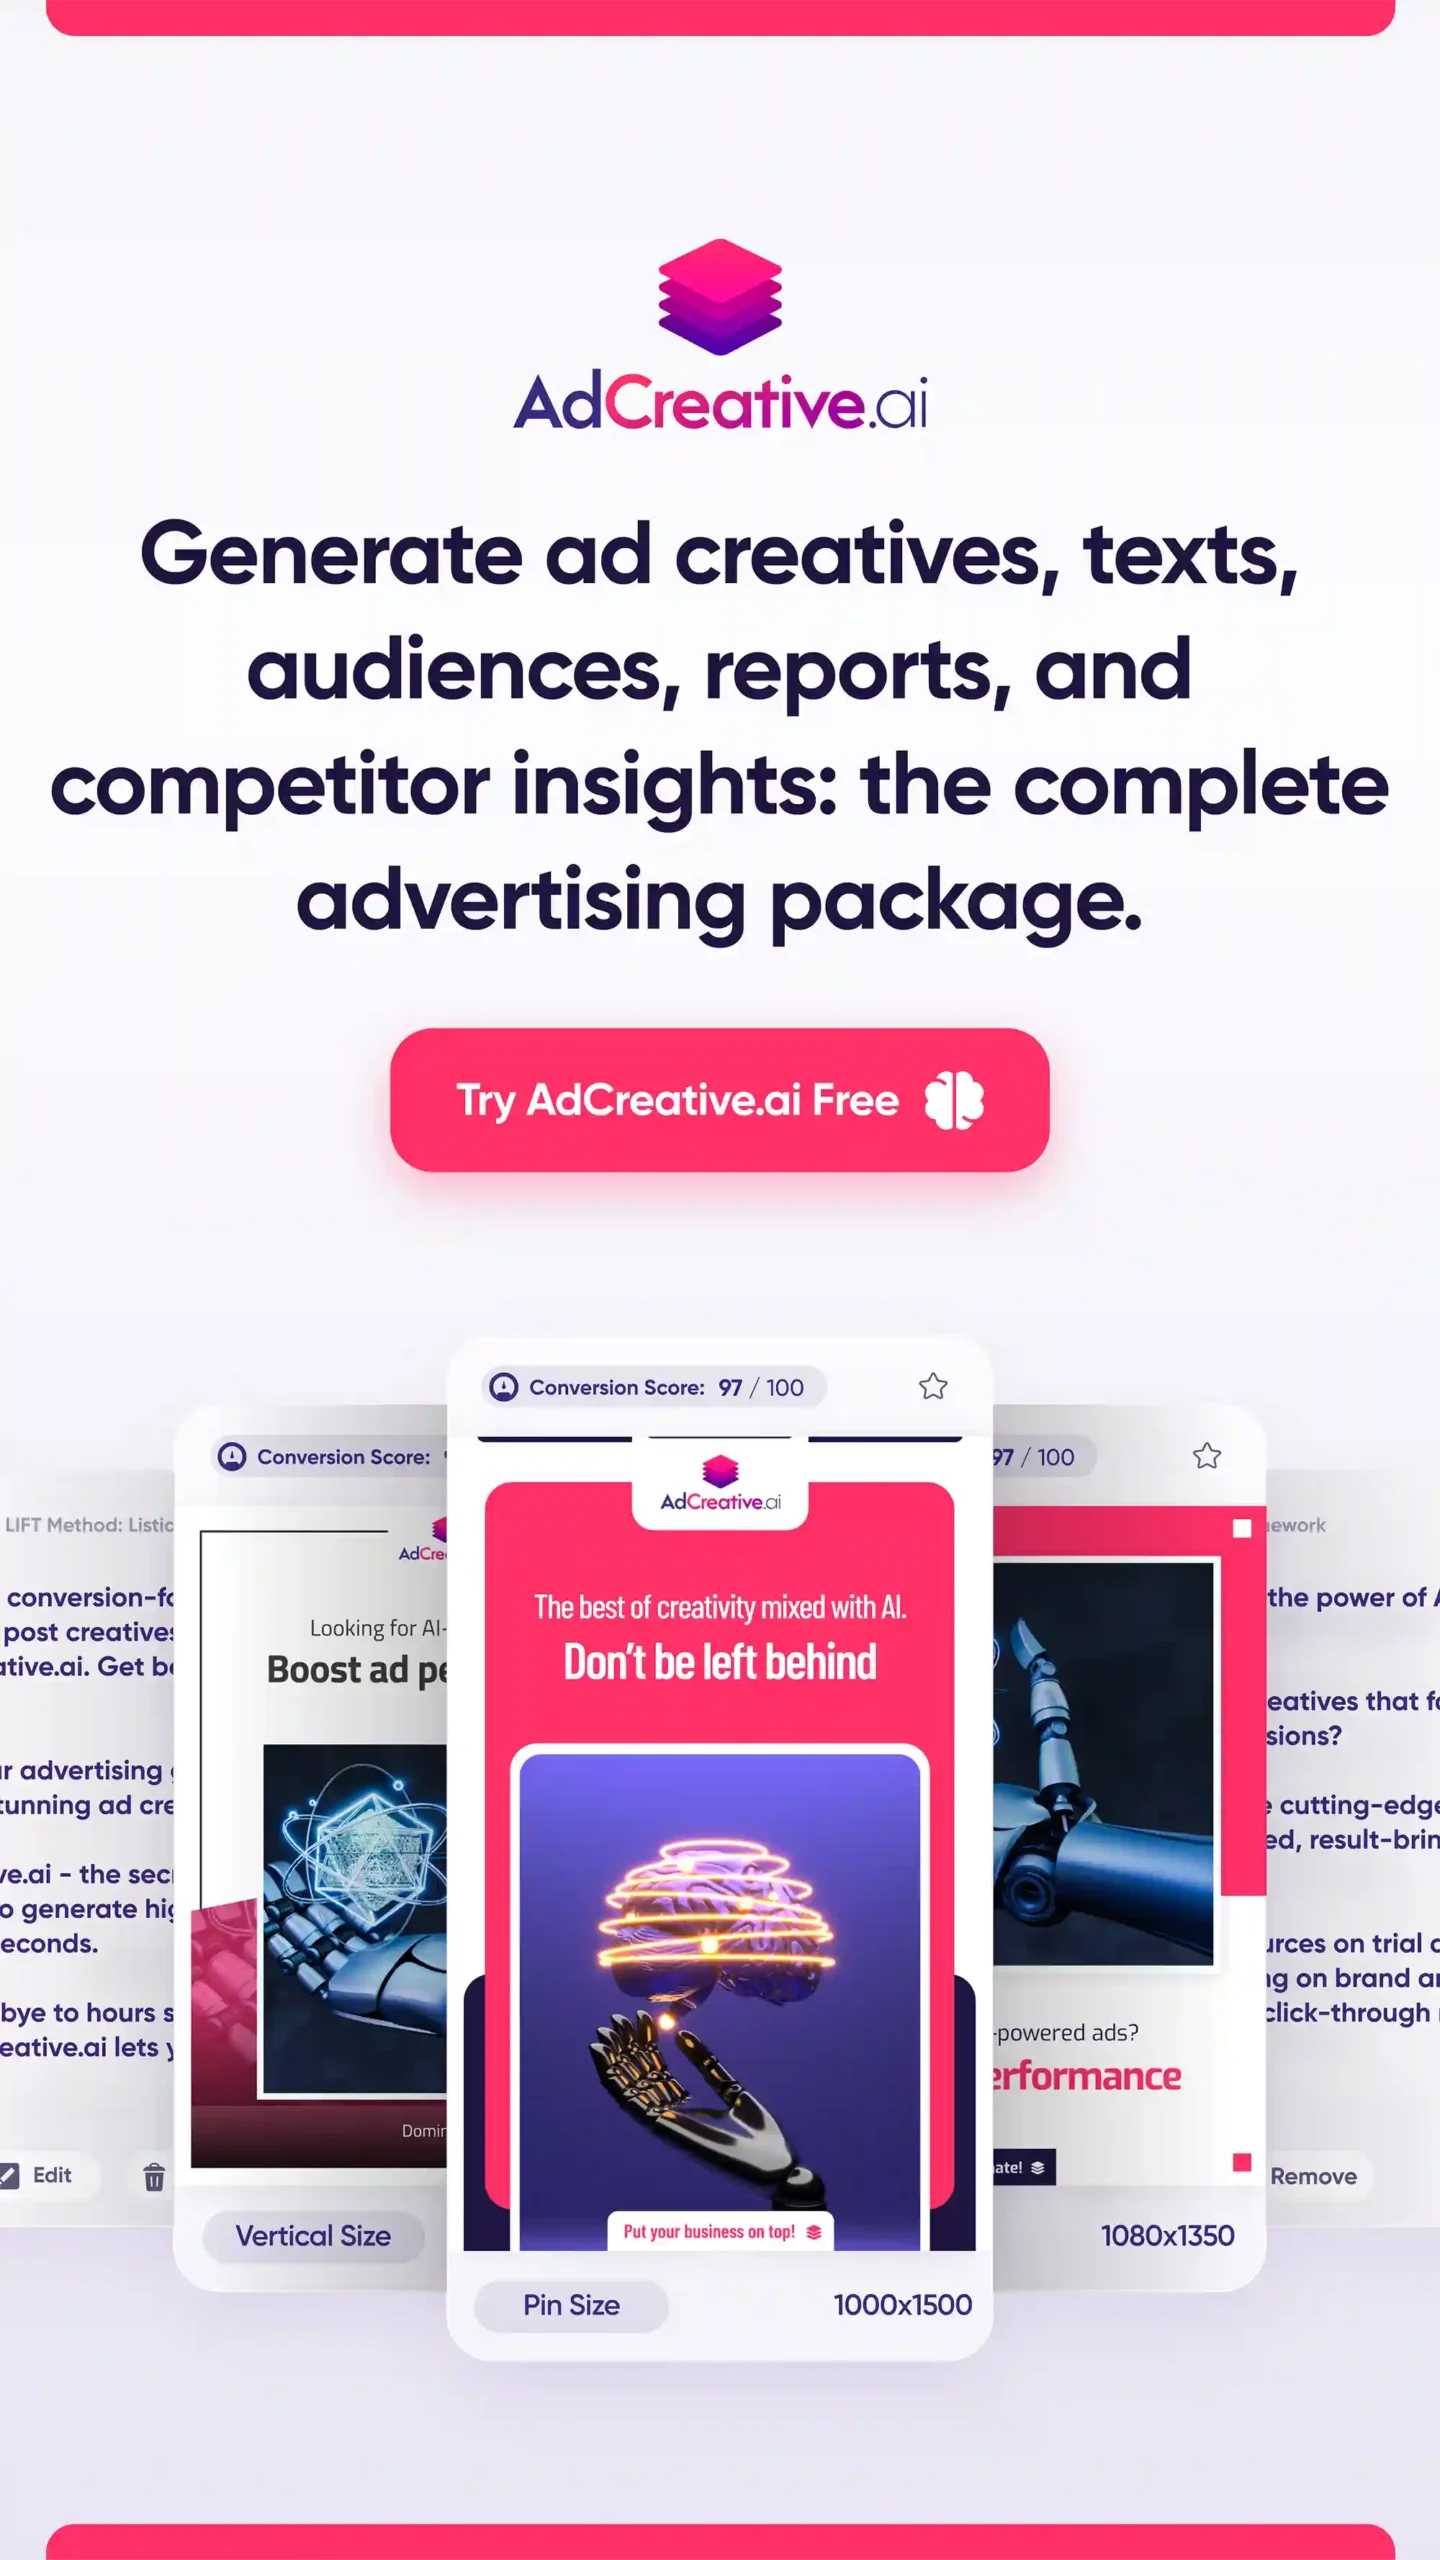 Discover more about the A Beginners Guide to Using AdcreativeAI for Creative Advertising.